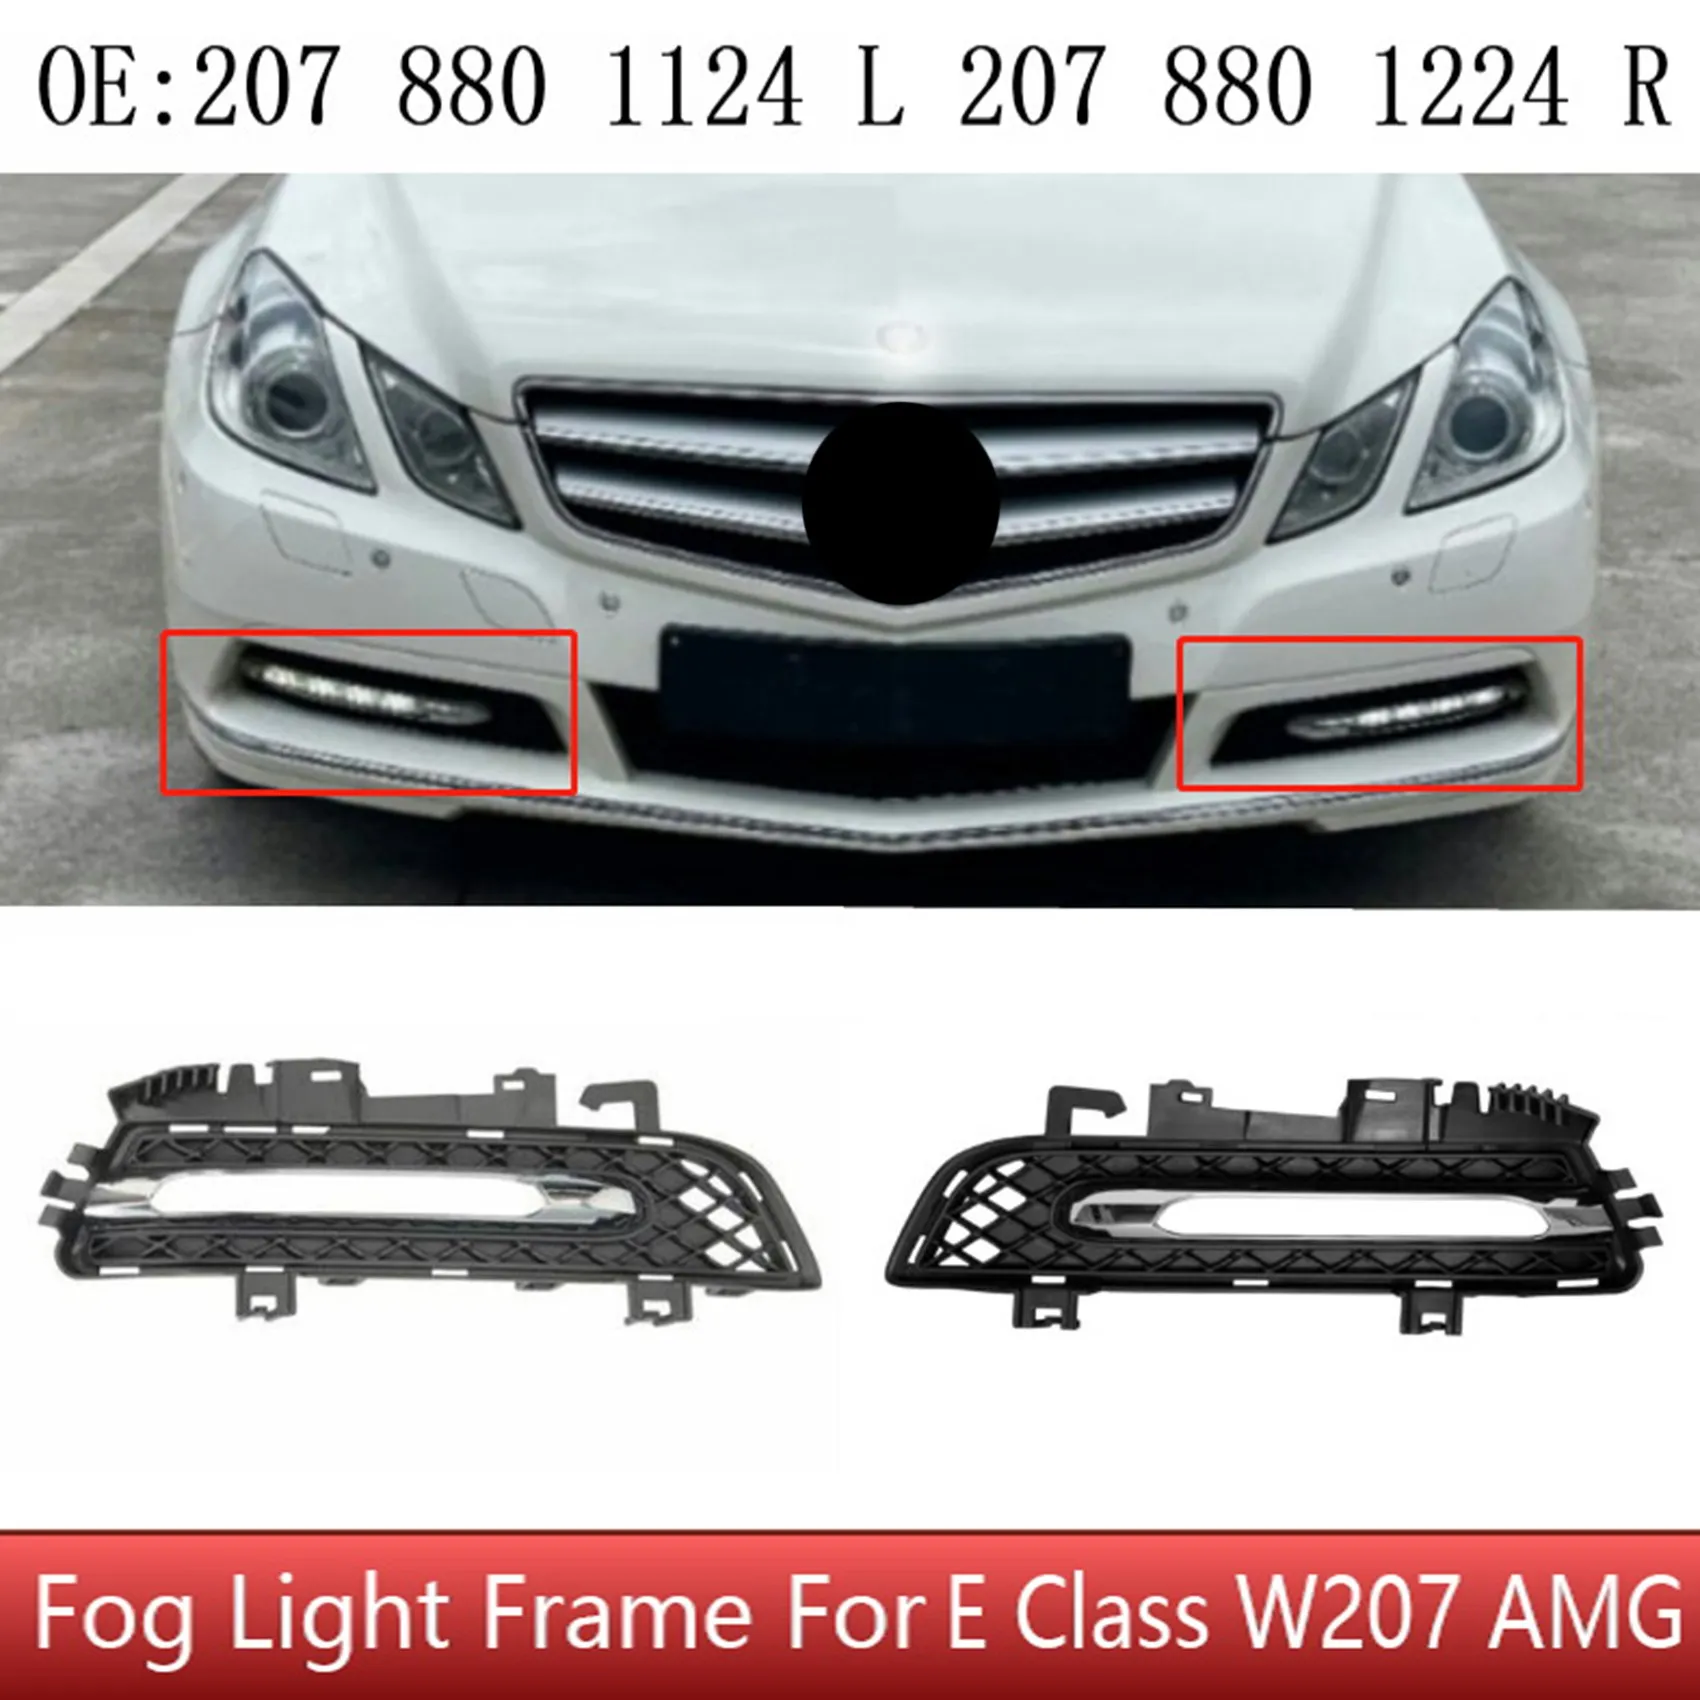 

1Pair Fog Light Frame Front Bumper Lower Grill Fog Lamp Cover for Mercedes Benz E Class W207 AMG 2078801124 2078801224